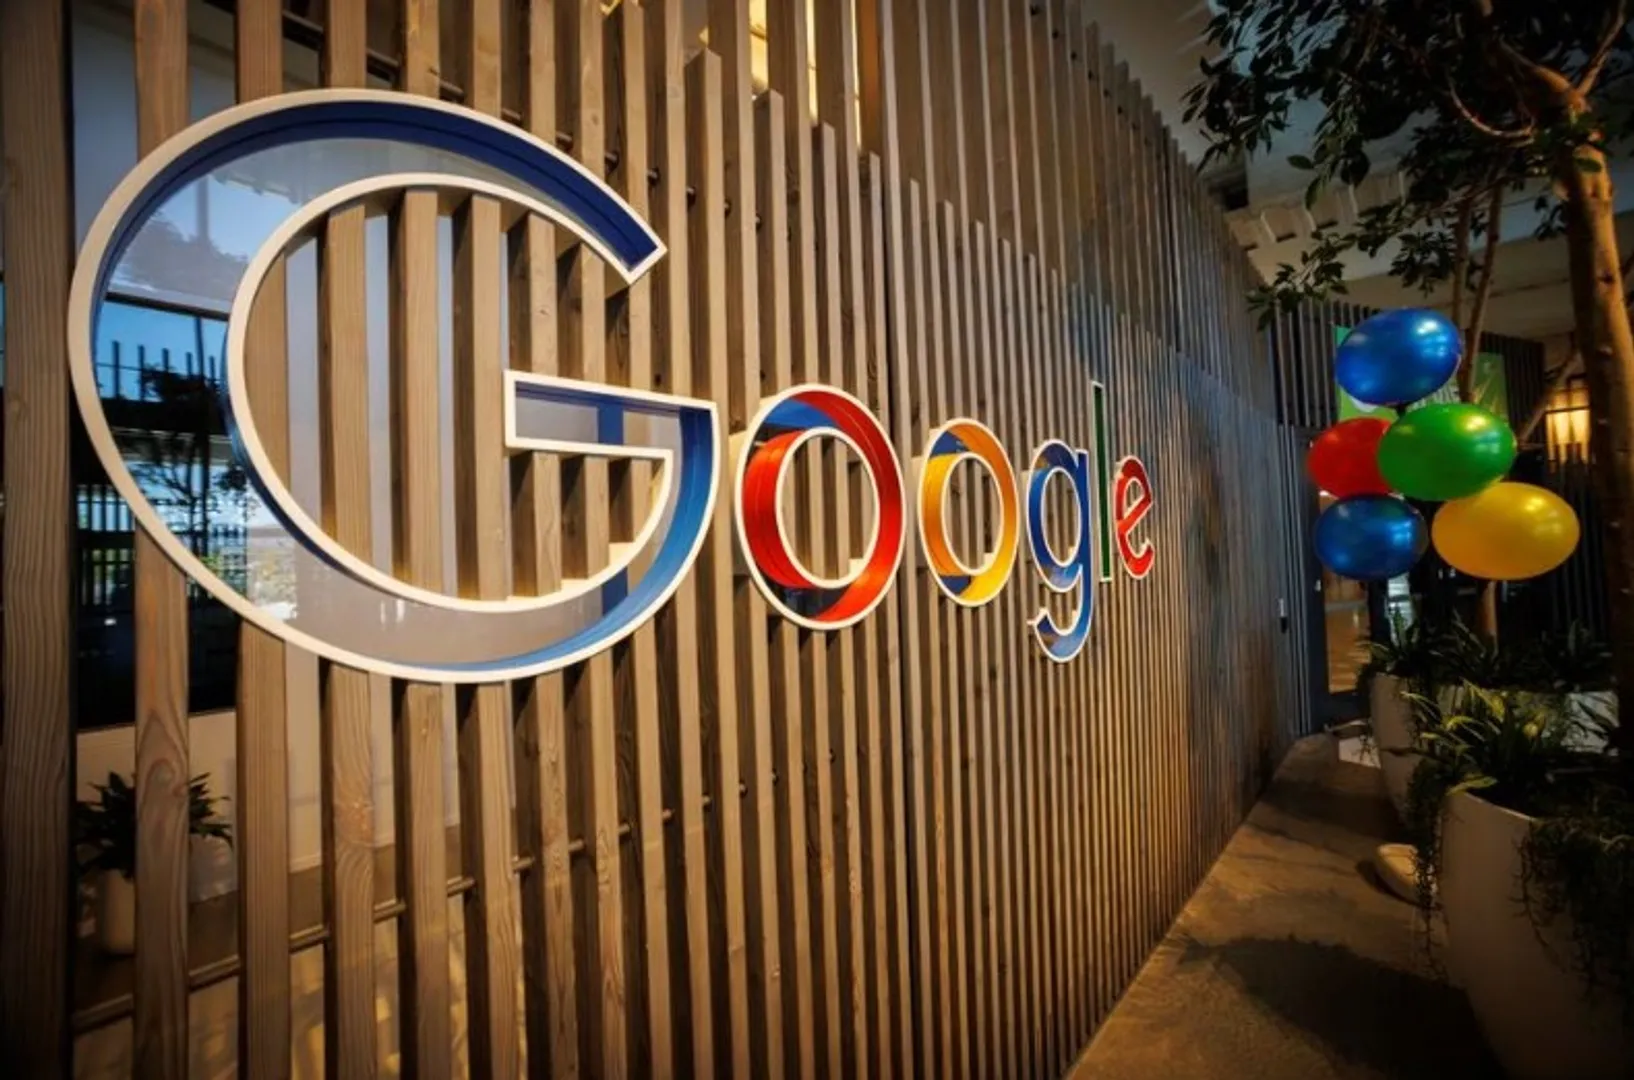 Google to pay $155 million in settlements over location tracking https://www.reuters.com/legal/google-pay-155-million-settlements-over-location-tracking-2023-09-15/

#Google  #LocationTracking  #Settlement  #ClassAction  #DataProtection 